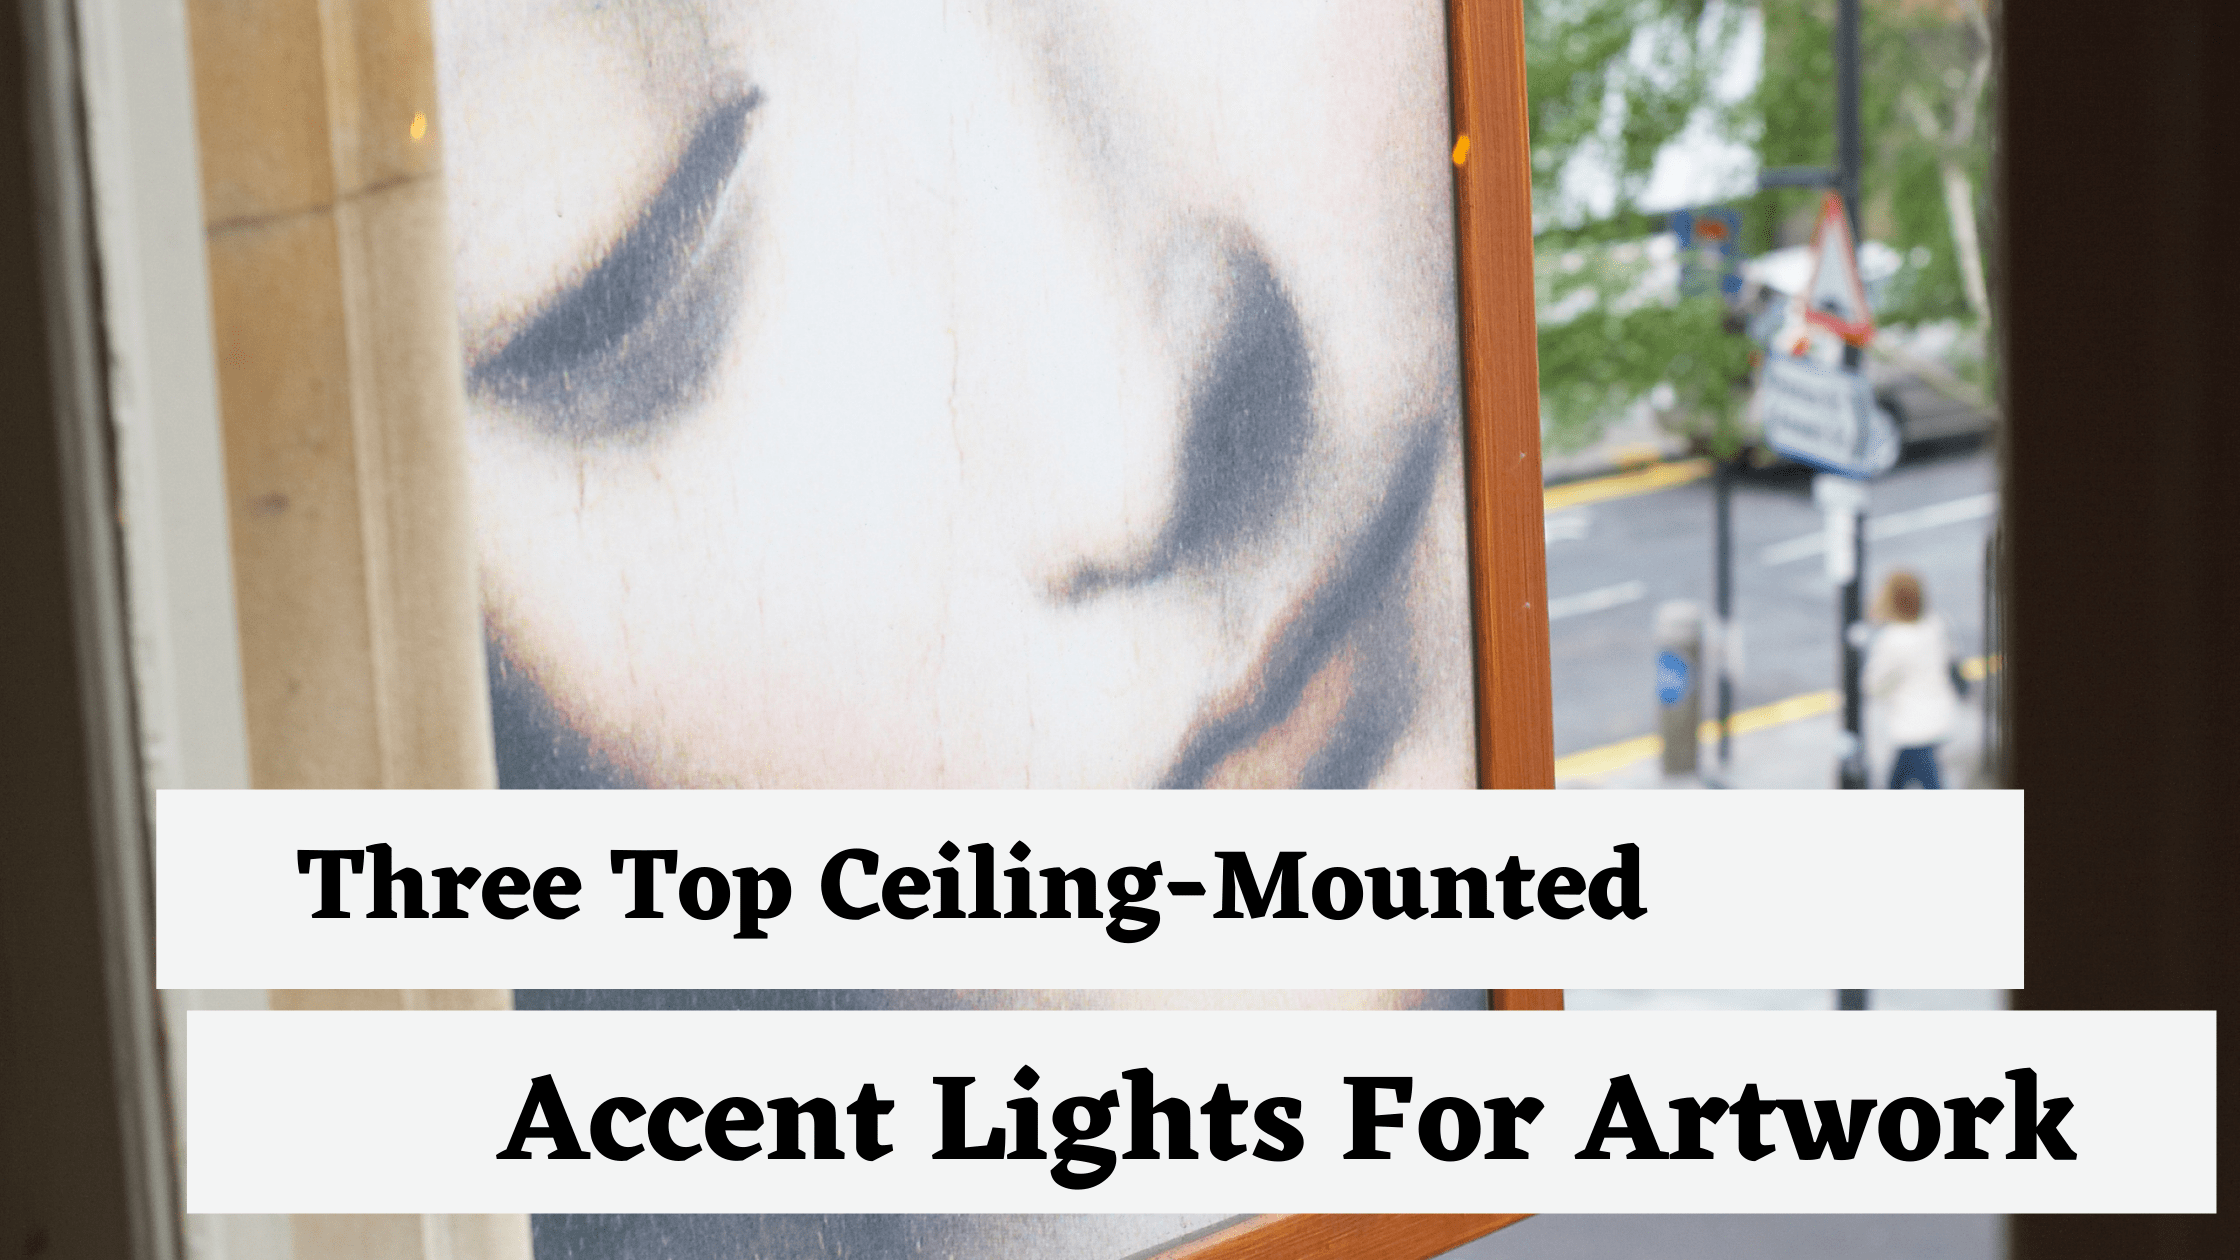 Ceiling-Mounted Accent Lights For Artwork